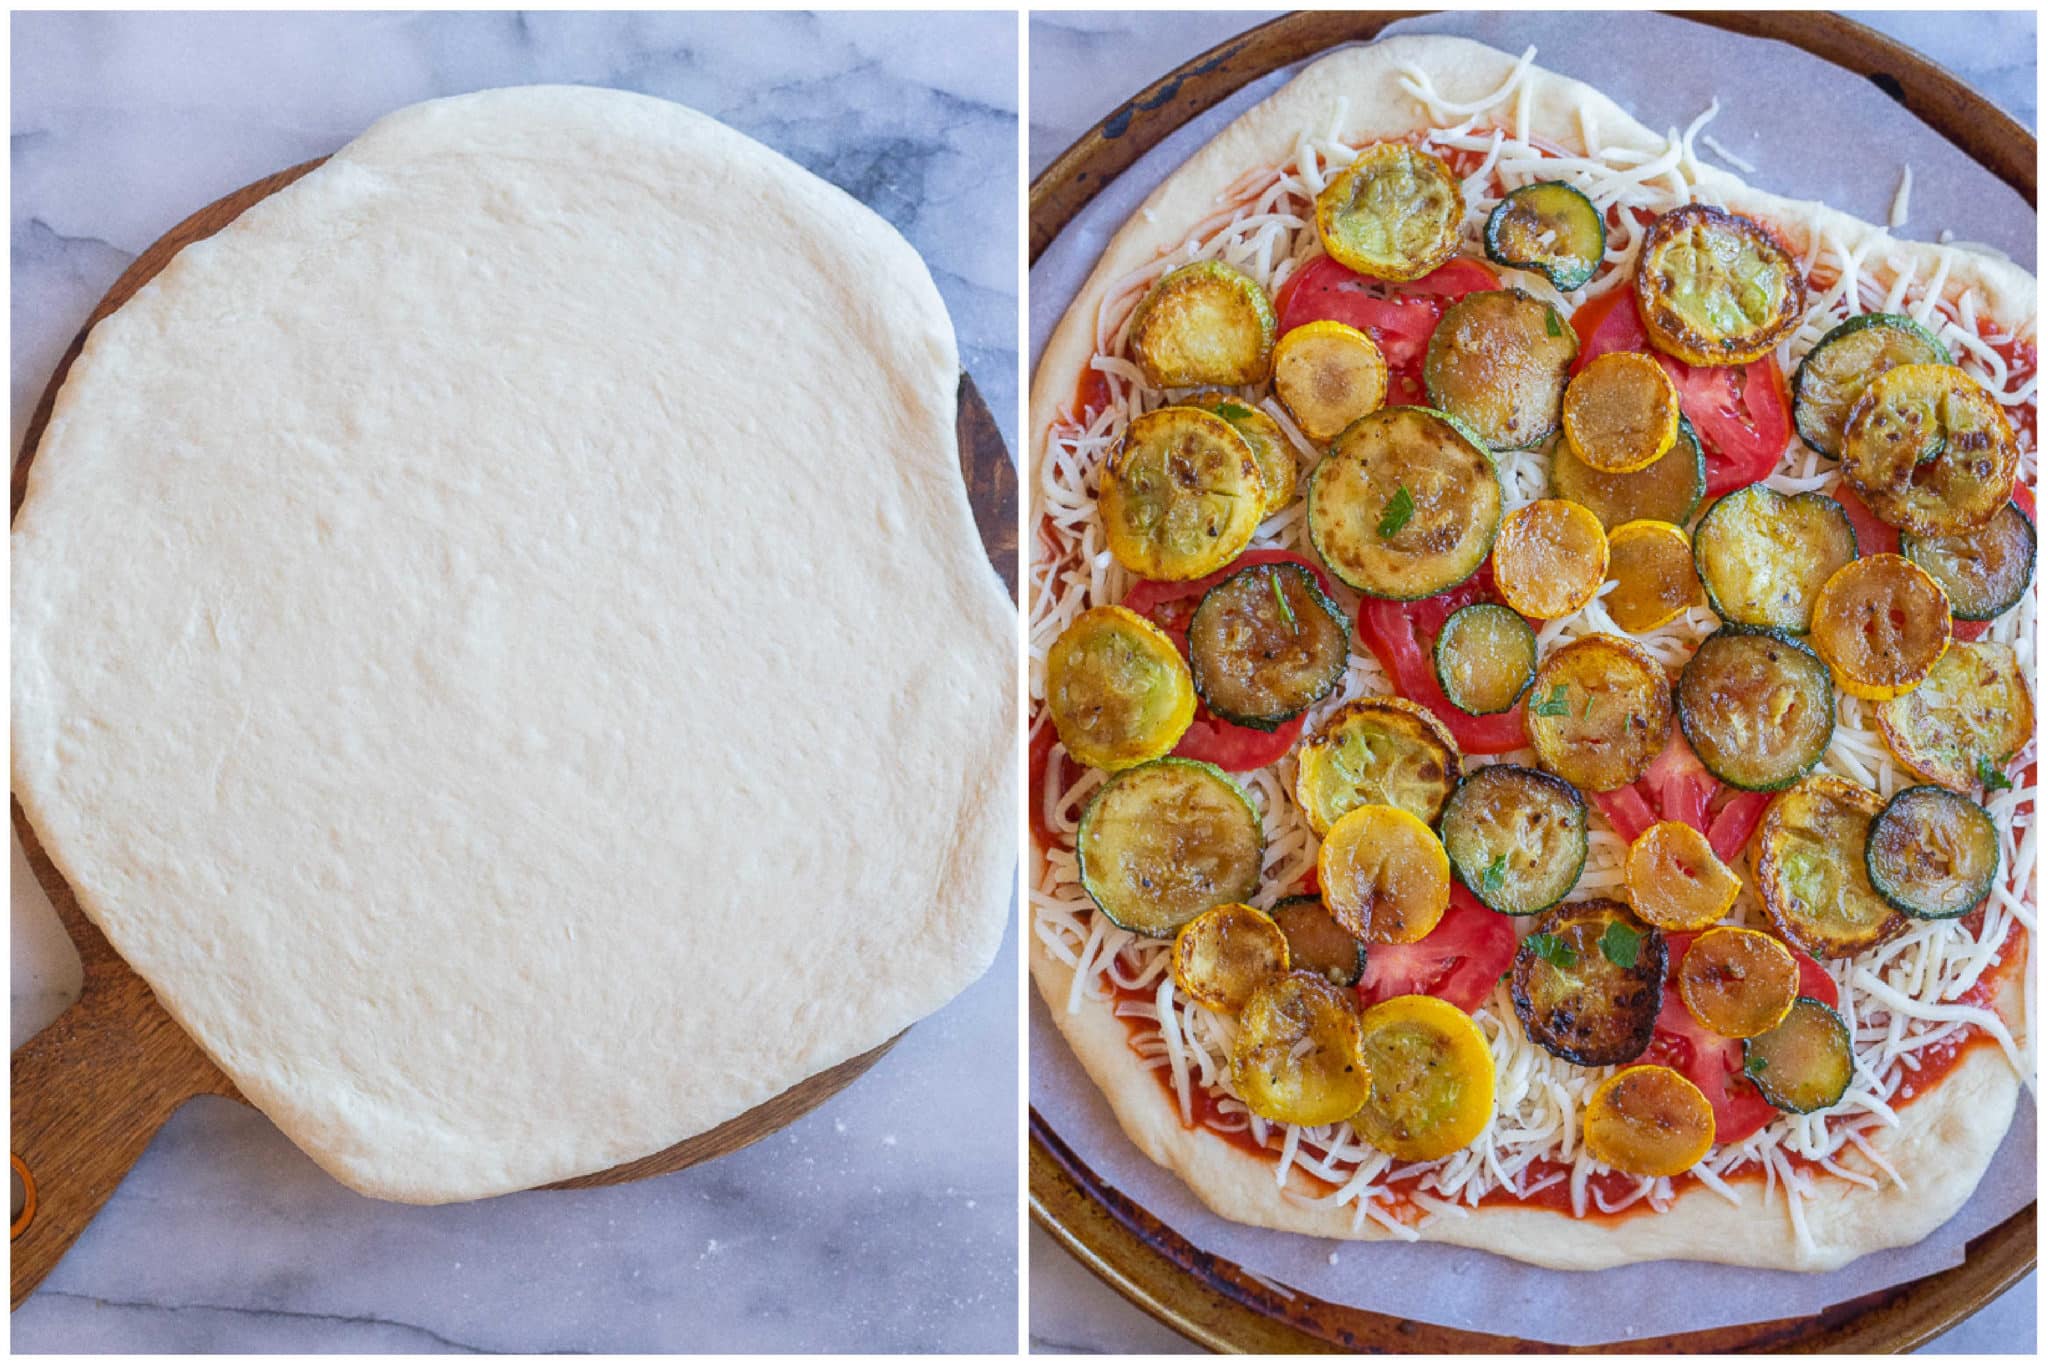 pizza dough rolled out on a cutting board with tomatoes and summer squash